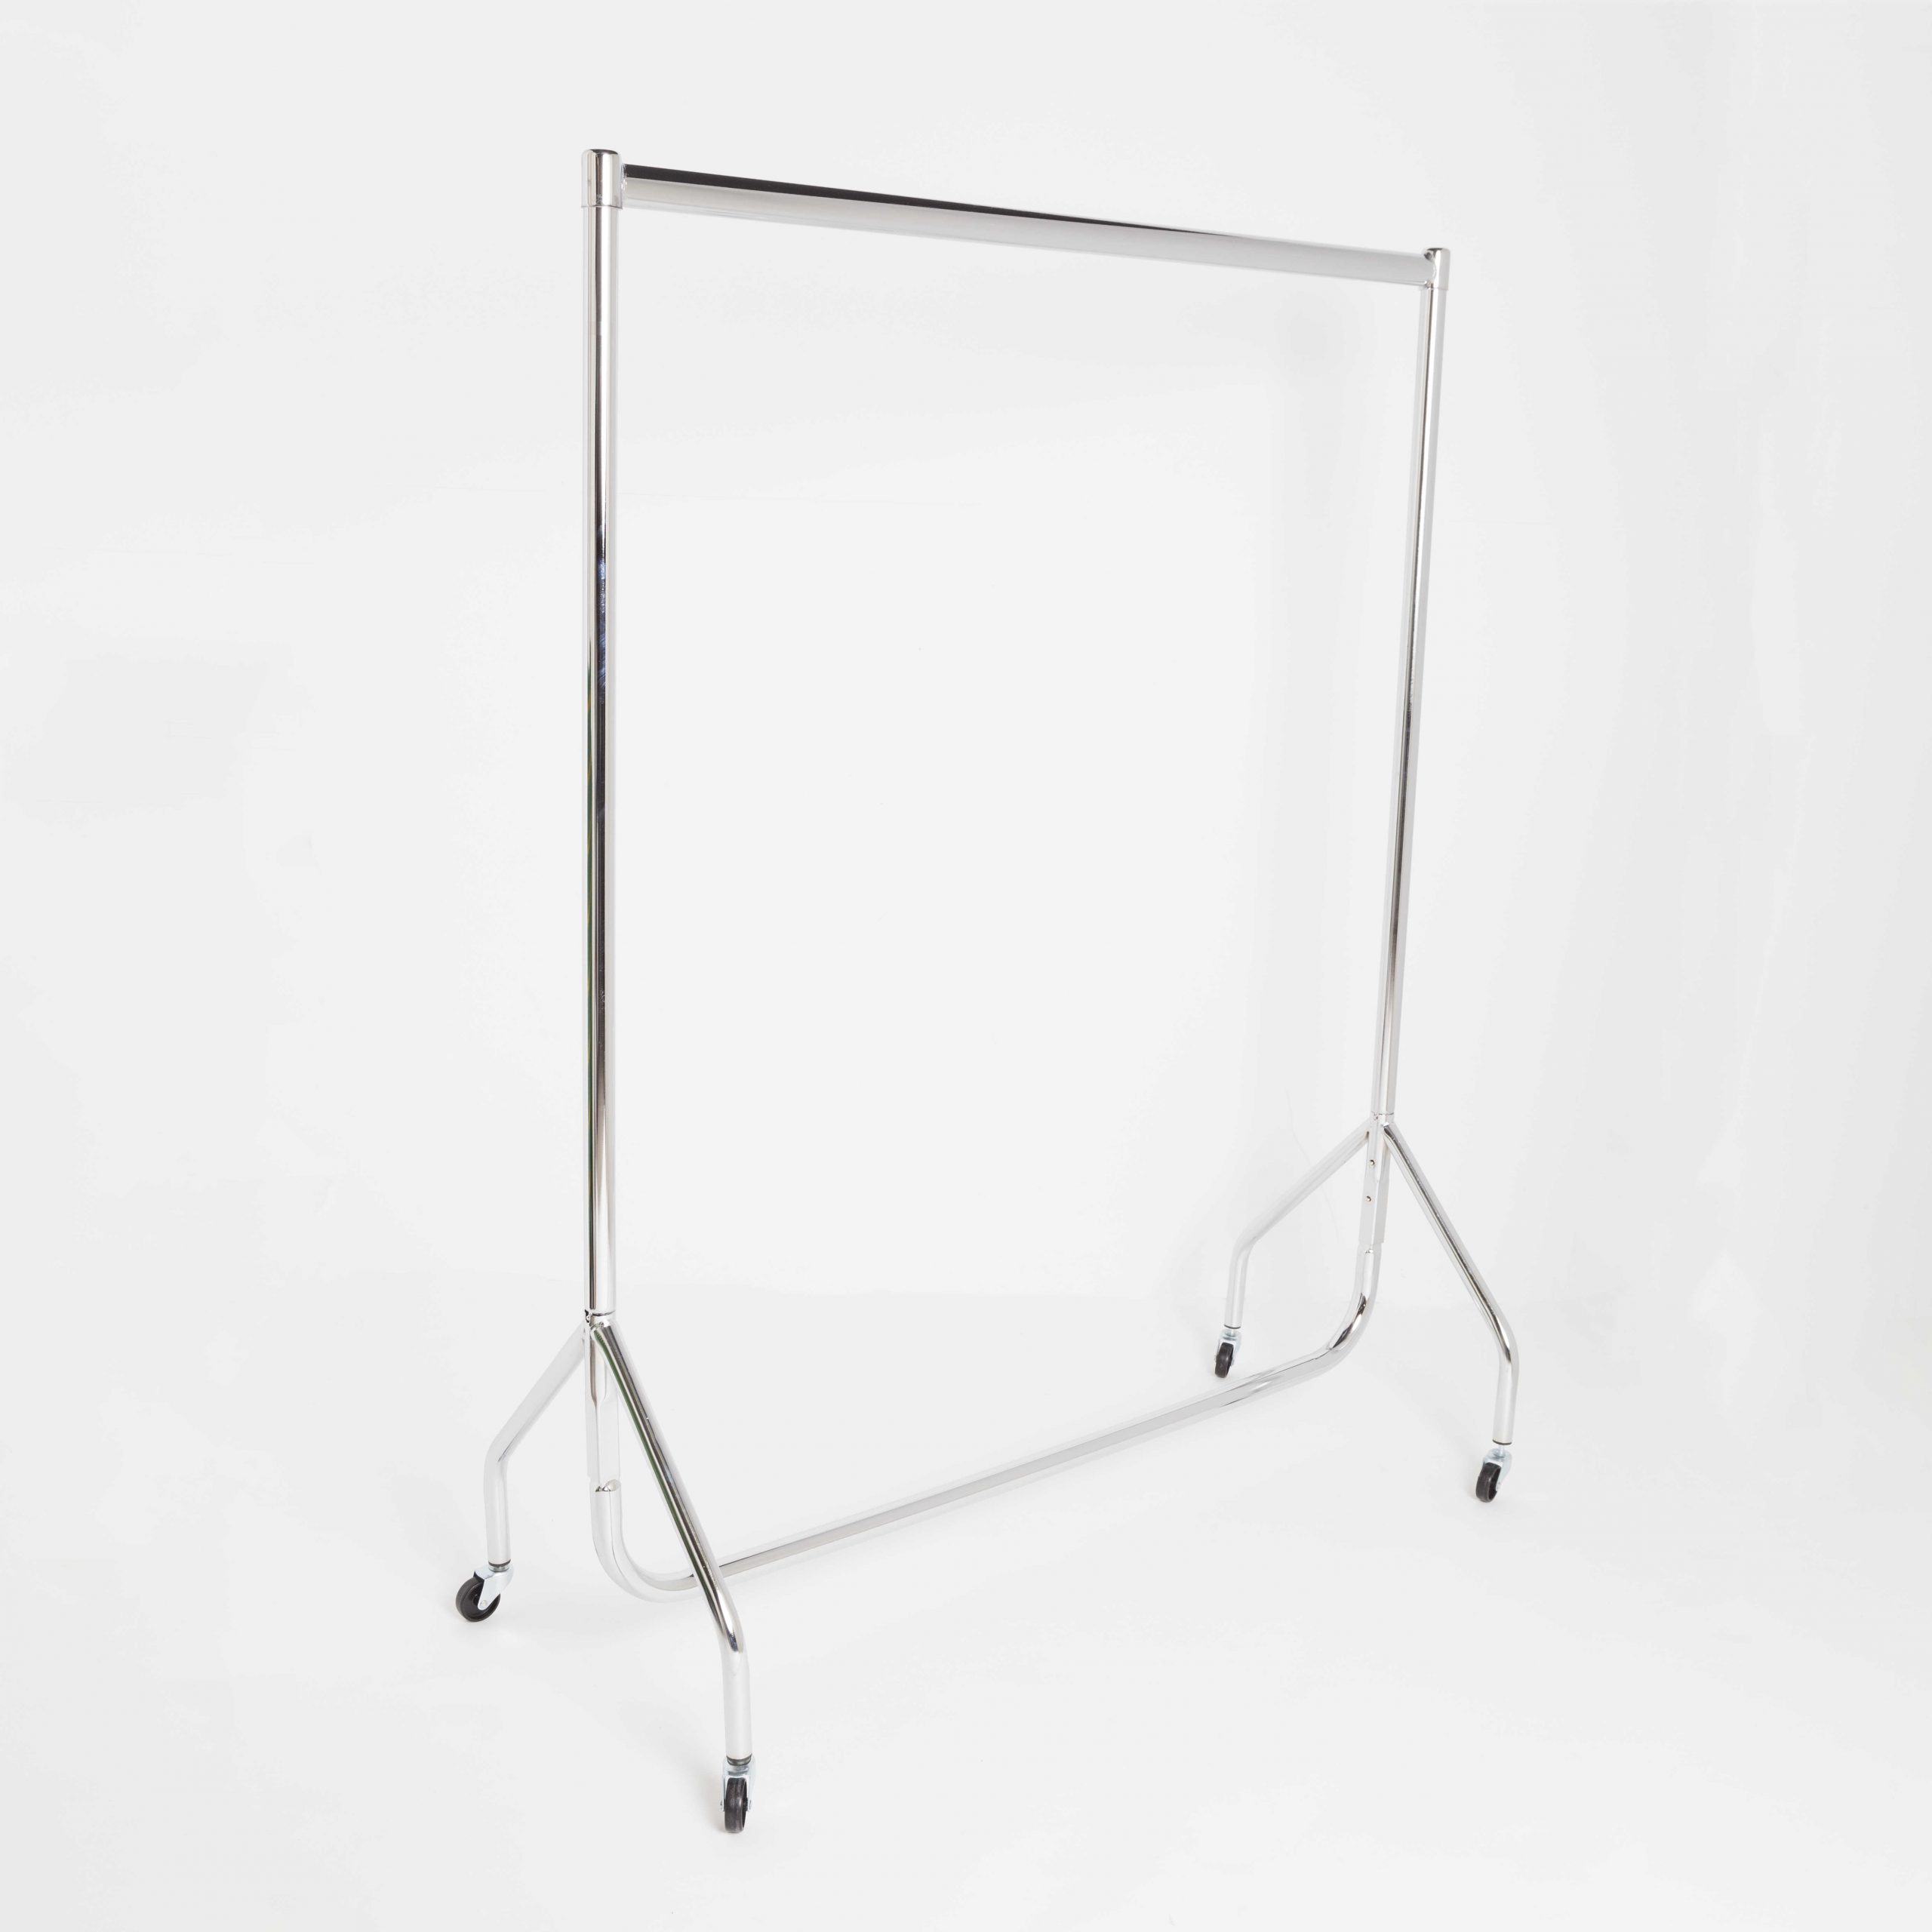 Buy Chrome Clothing Rails With Wheels ...